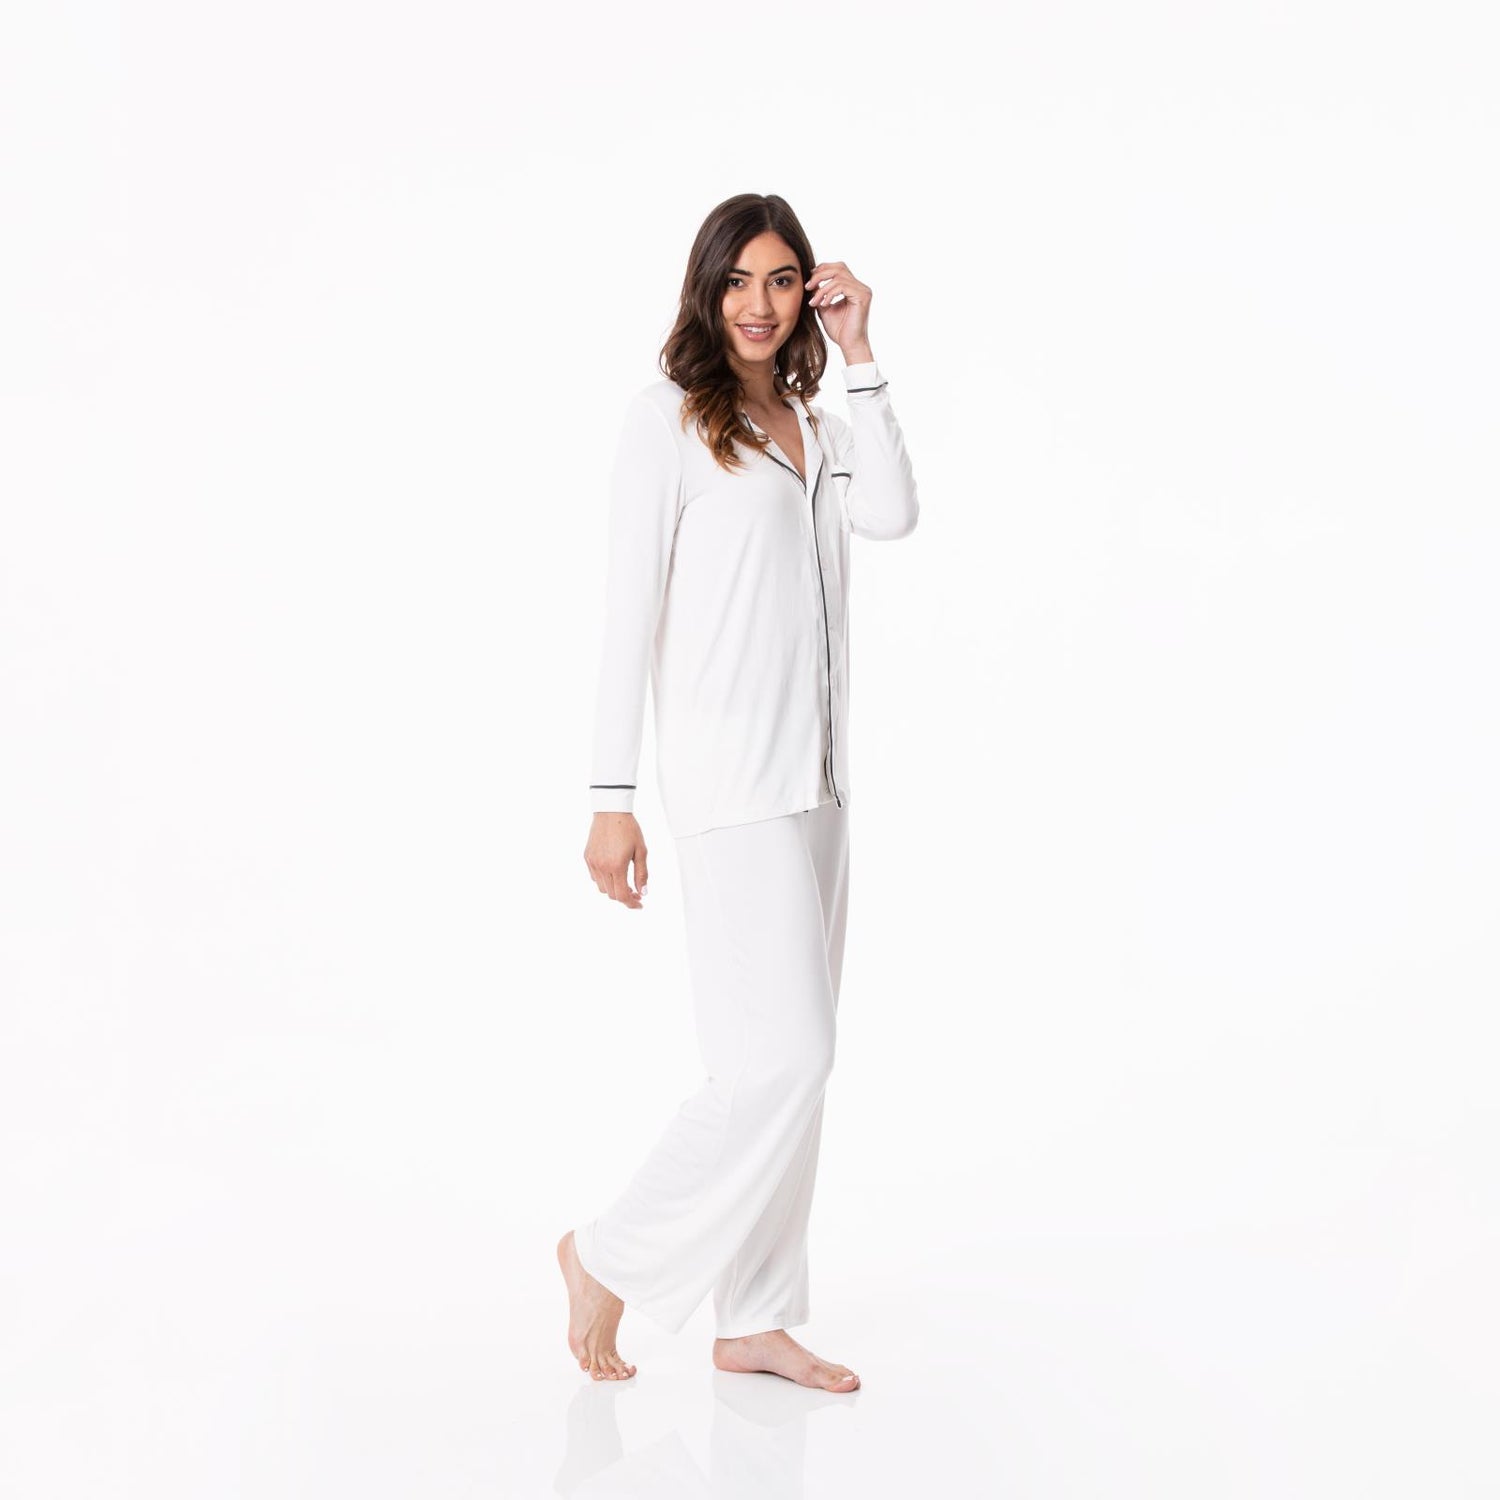 Women's Solid Long Sleeved Collared Pajama Set in Natural with Pewter